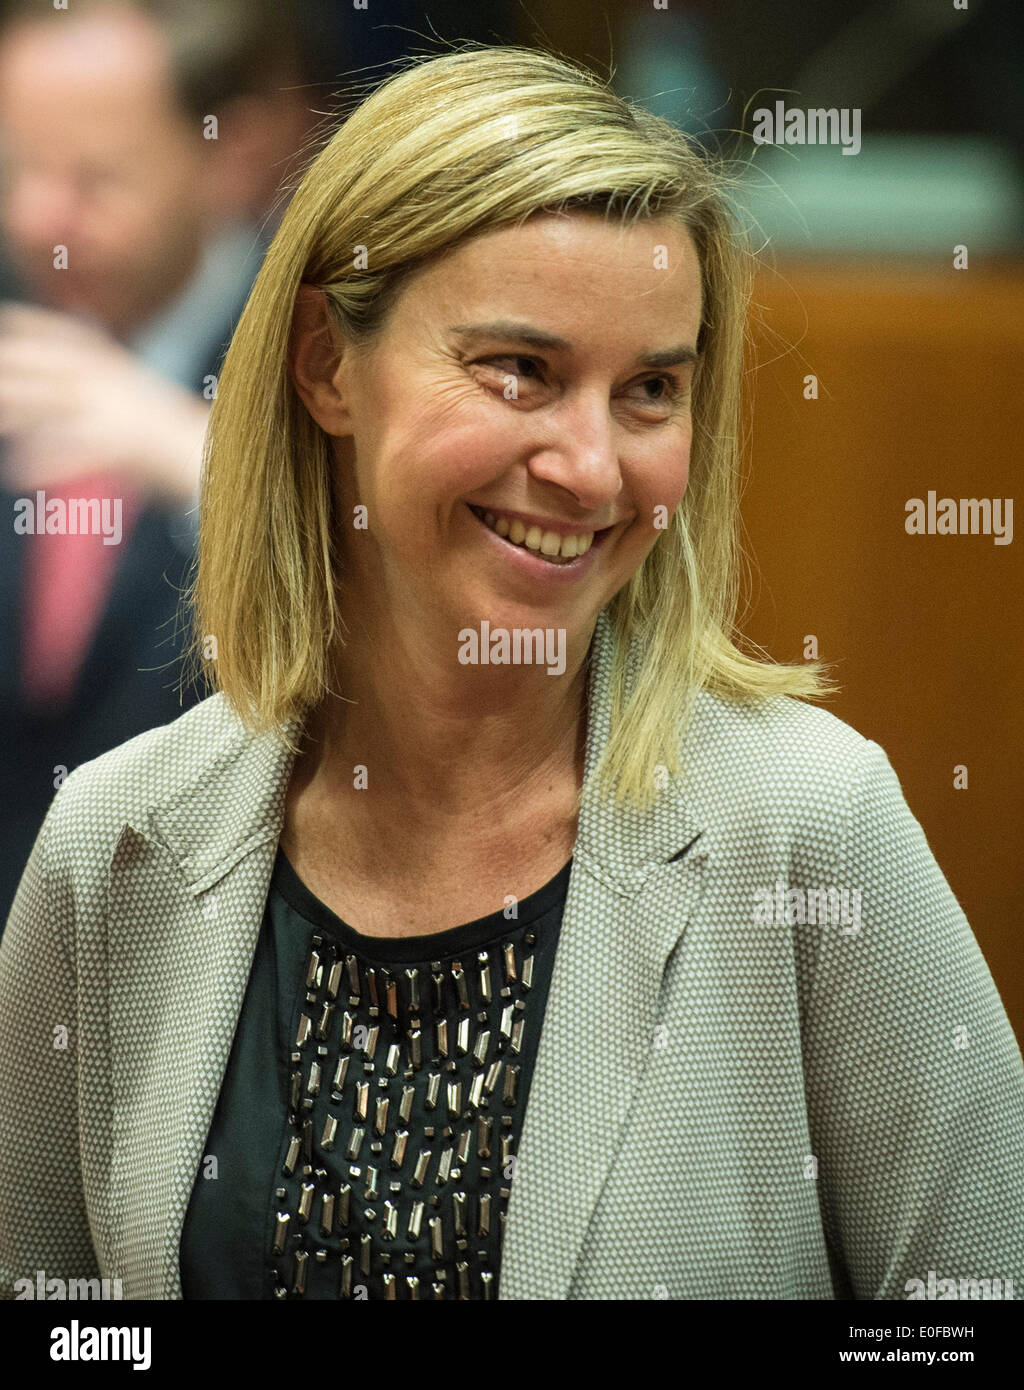 Brussels, Belgium. 12th May, 2014. Italian foreign affairs minister Federica Mogherini at the start of European Foreign affairs council at the EU headquarters in Brussels, Belgium on 12.05.2014 European ministers will make final preparations for the launch of a new European Institute of Peace.  Credit:  Wiktor Dabkowski/dpa picture alliance/Alamy Live News Stock Photo